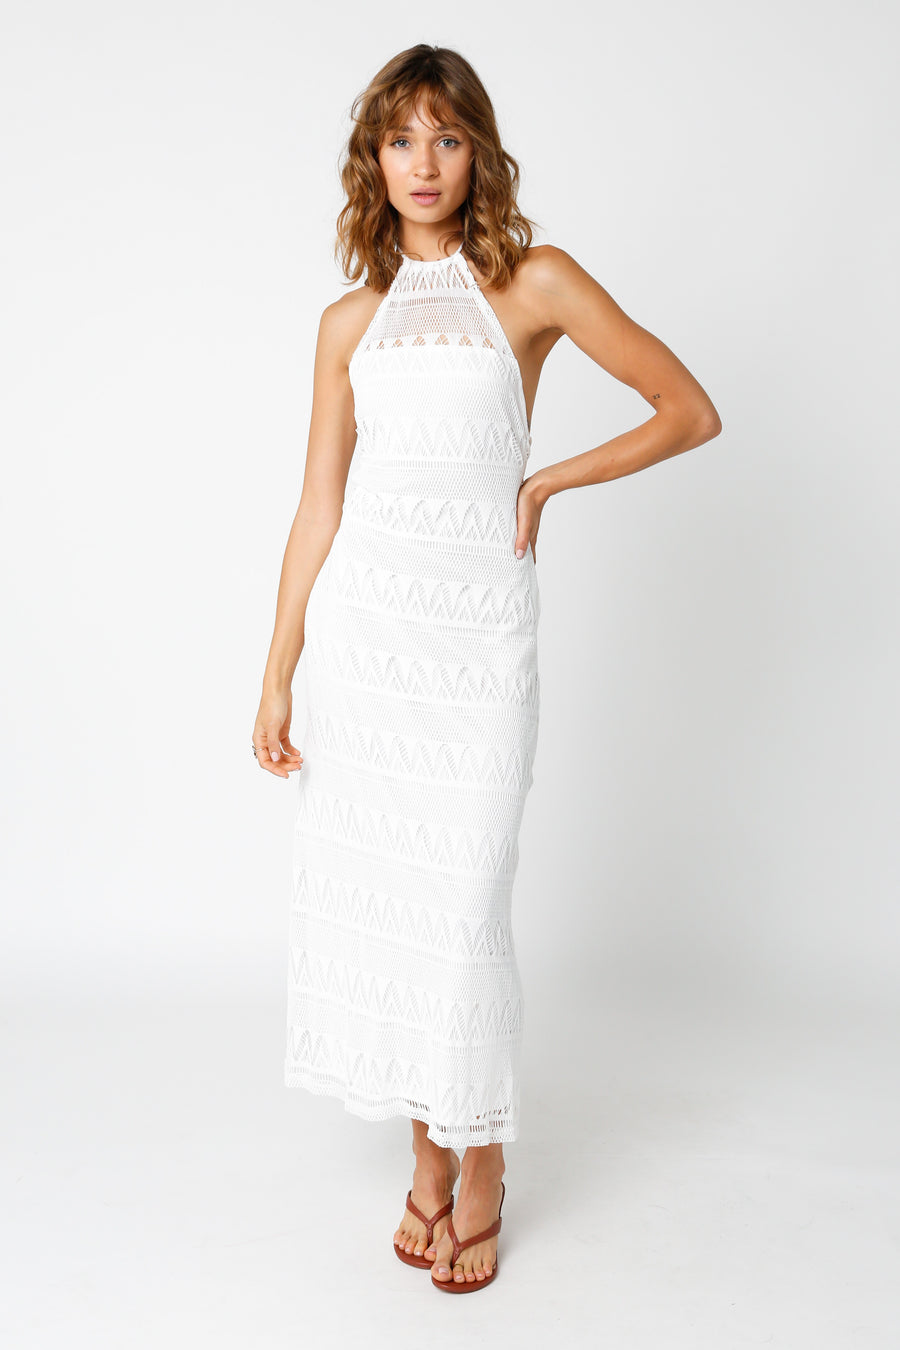 White maxi dress with cross cross back tie. 